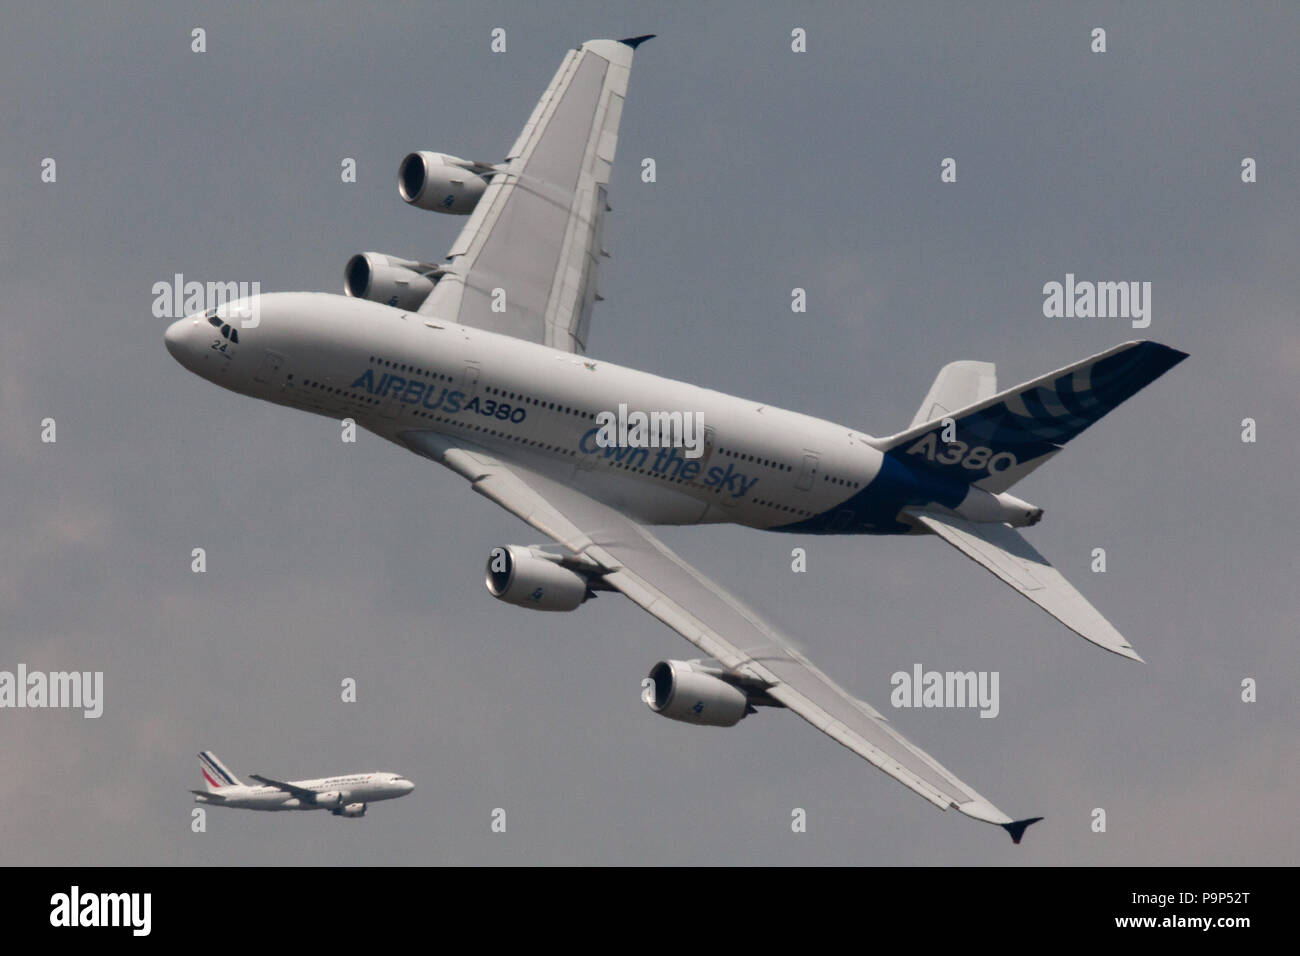 The Airbus A380 widebody civil jet airplane performs its demonstration flight during the Paris Airshow-2013 over Le Bourget, France Stock Photo